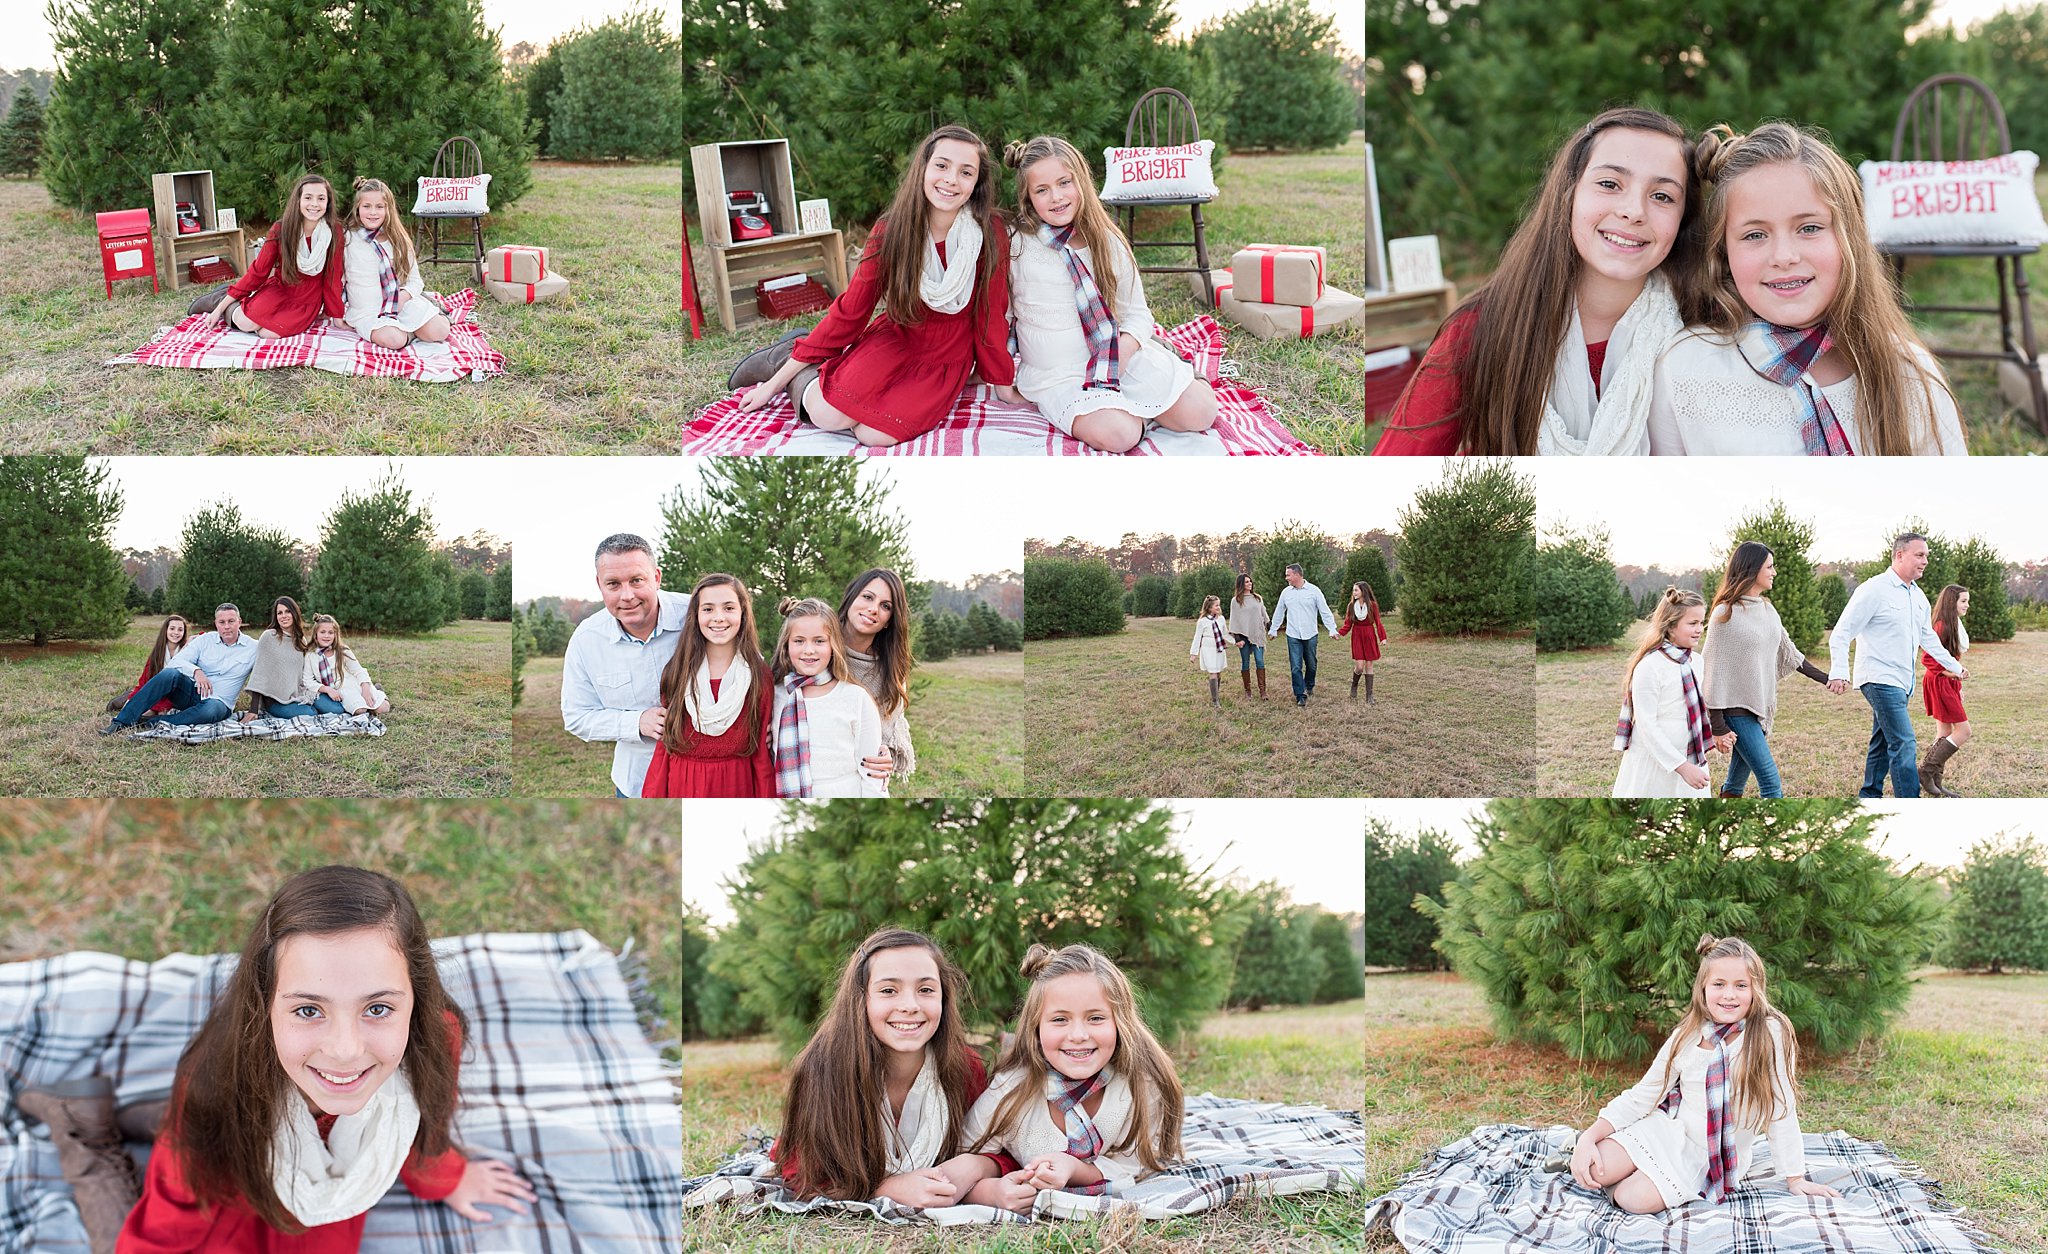 What should girls wear for family pictures, how about these cute dresses and scarf accessories? Photos by NJ family photographer Karrie Davis Photography